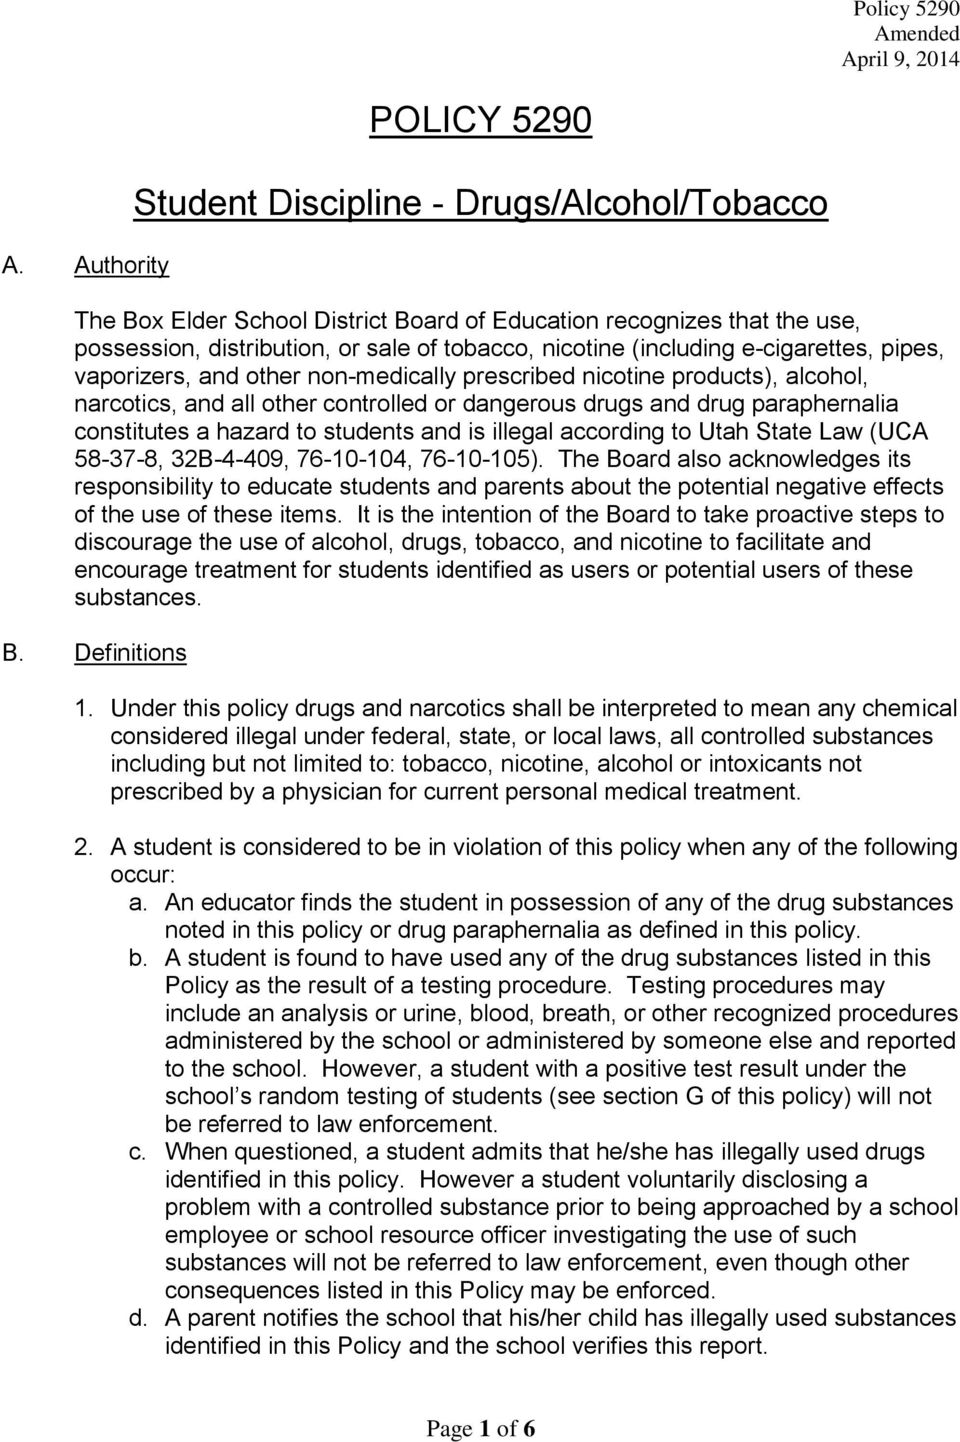 hazard to students and is illegal according to Utah State Law (UCA 58-37-8, 32B-4-409, 76-10-104, 76-10-105).